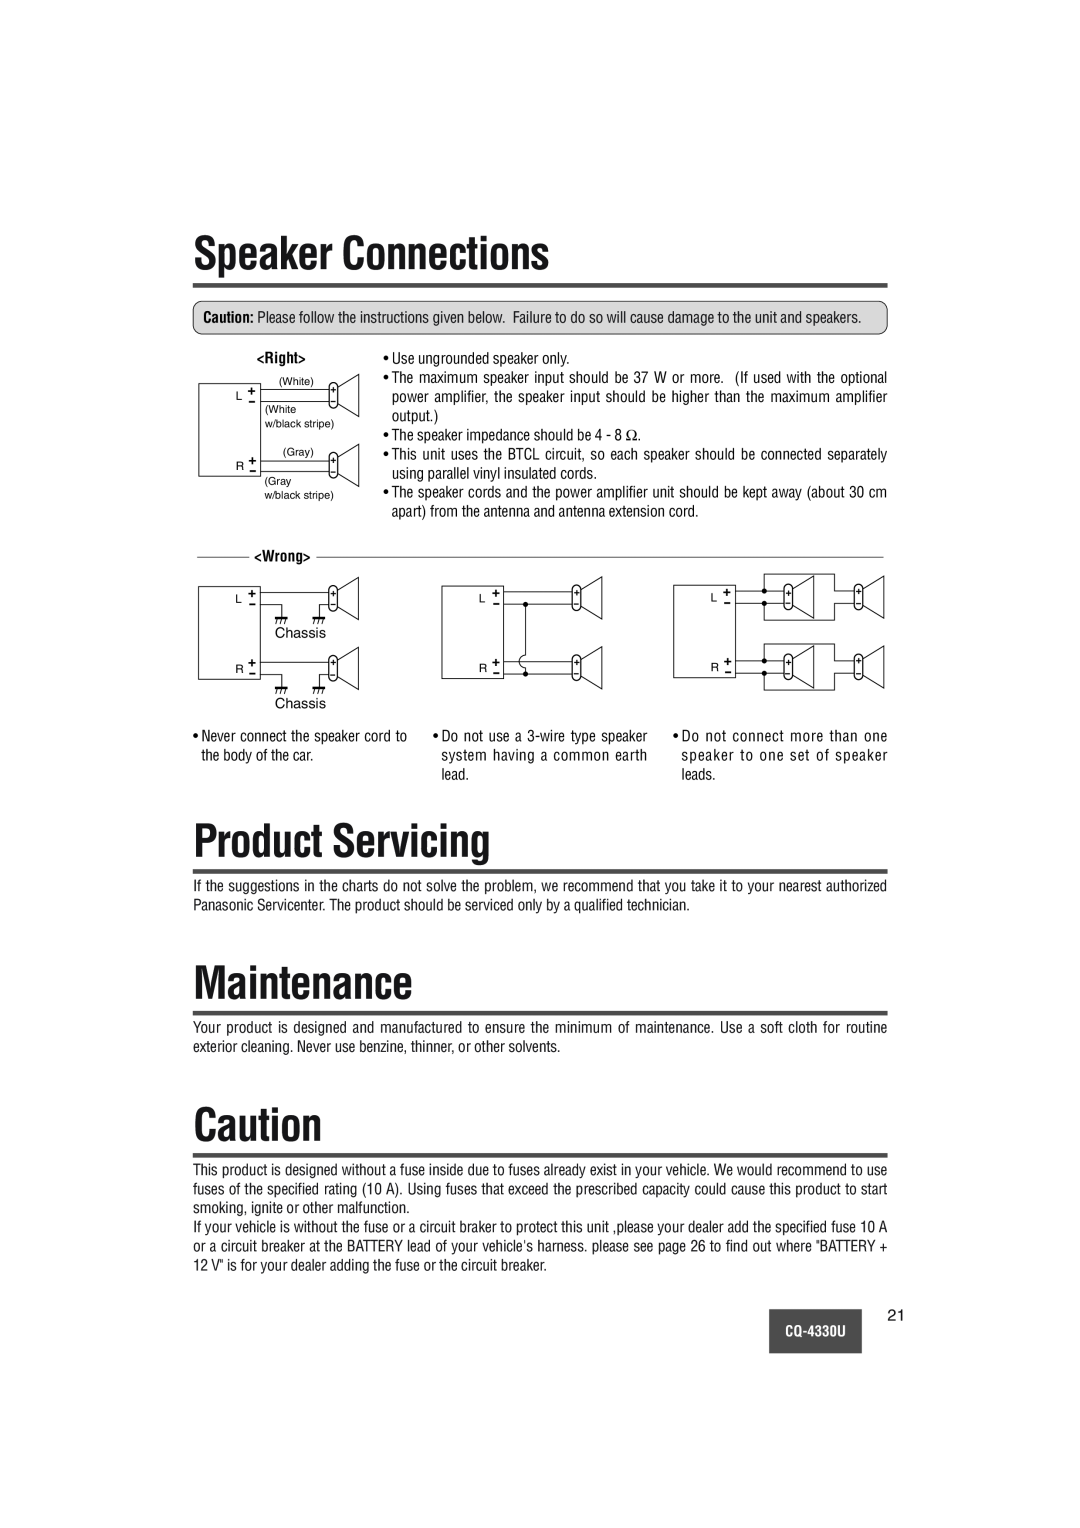 Panasonic CQ-4330U manual Speaker Connections, Product Servicing, Maintenance, Wrong, Chassis 